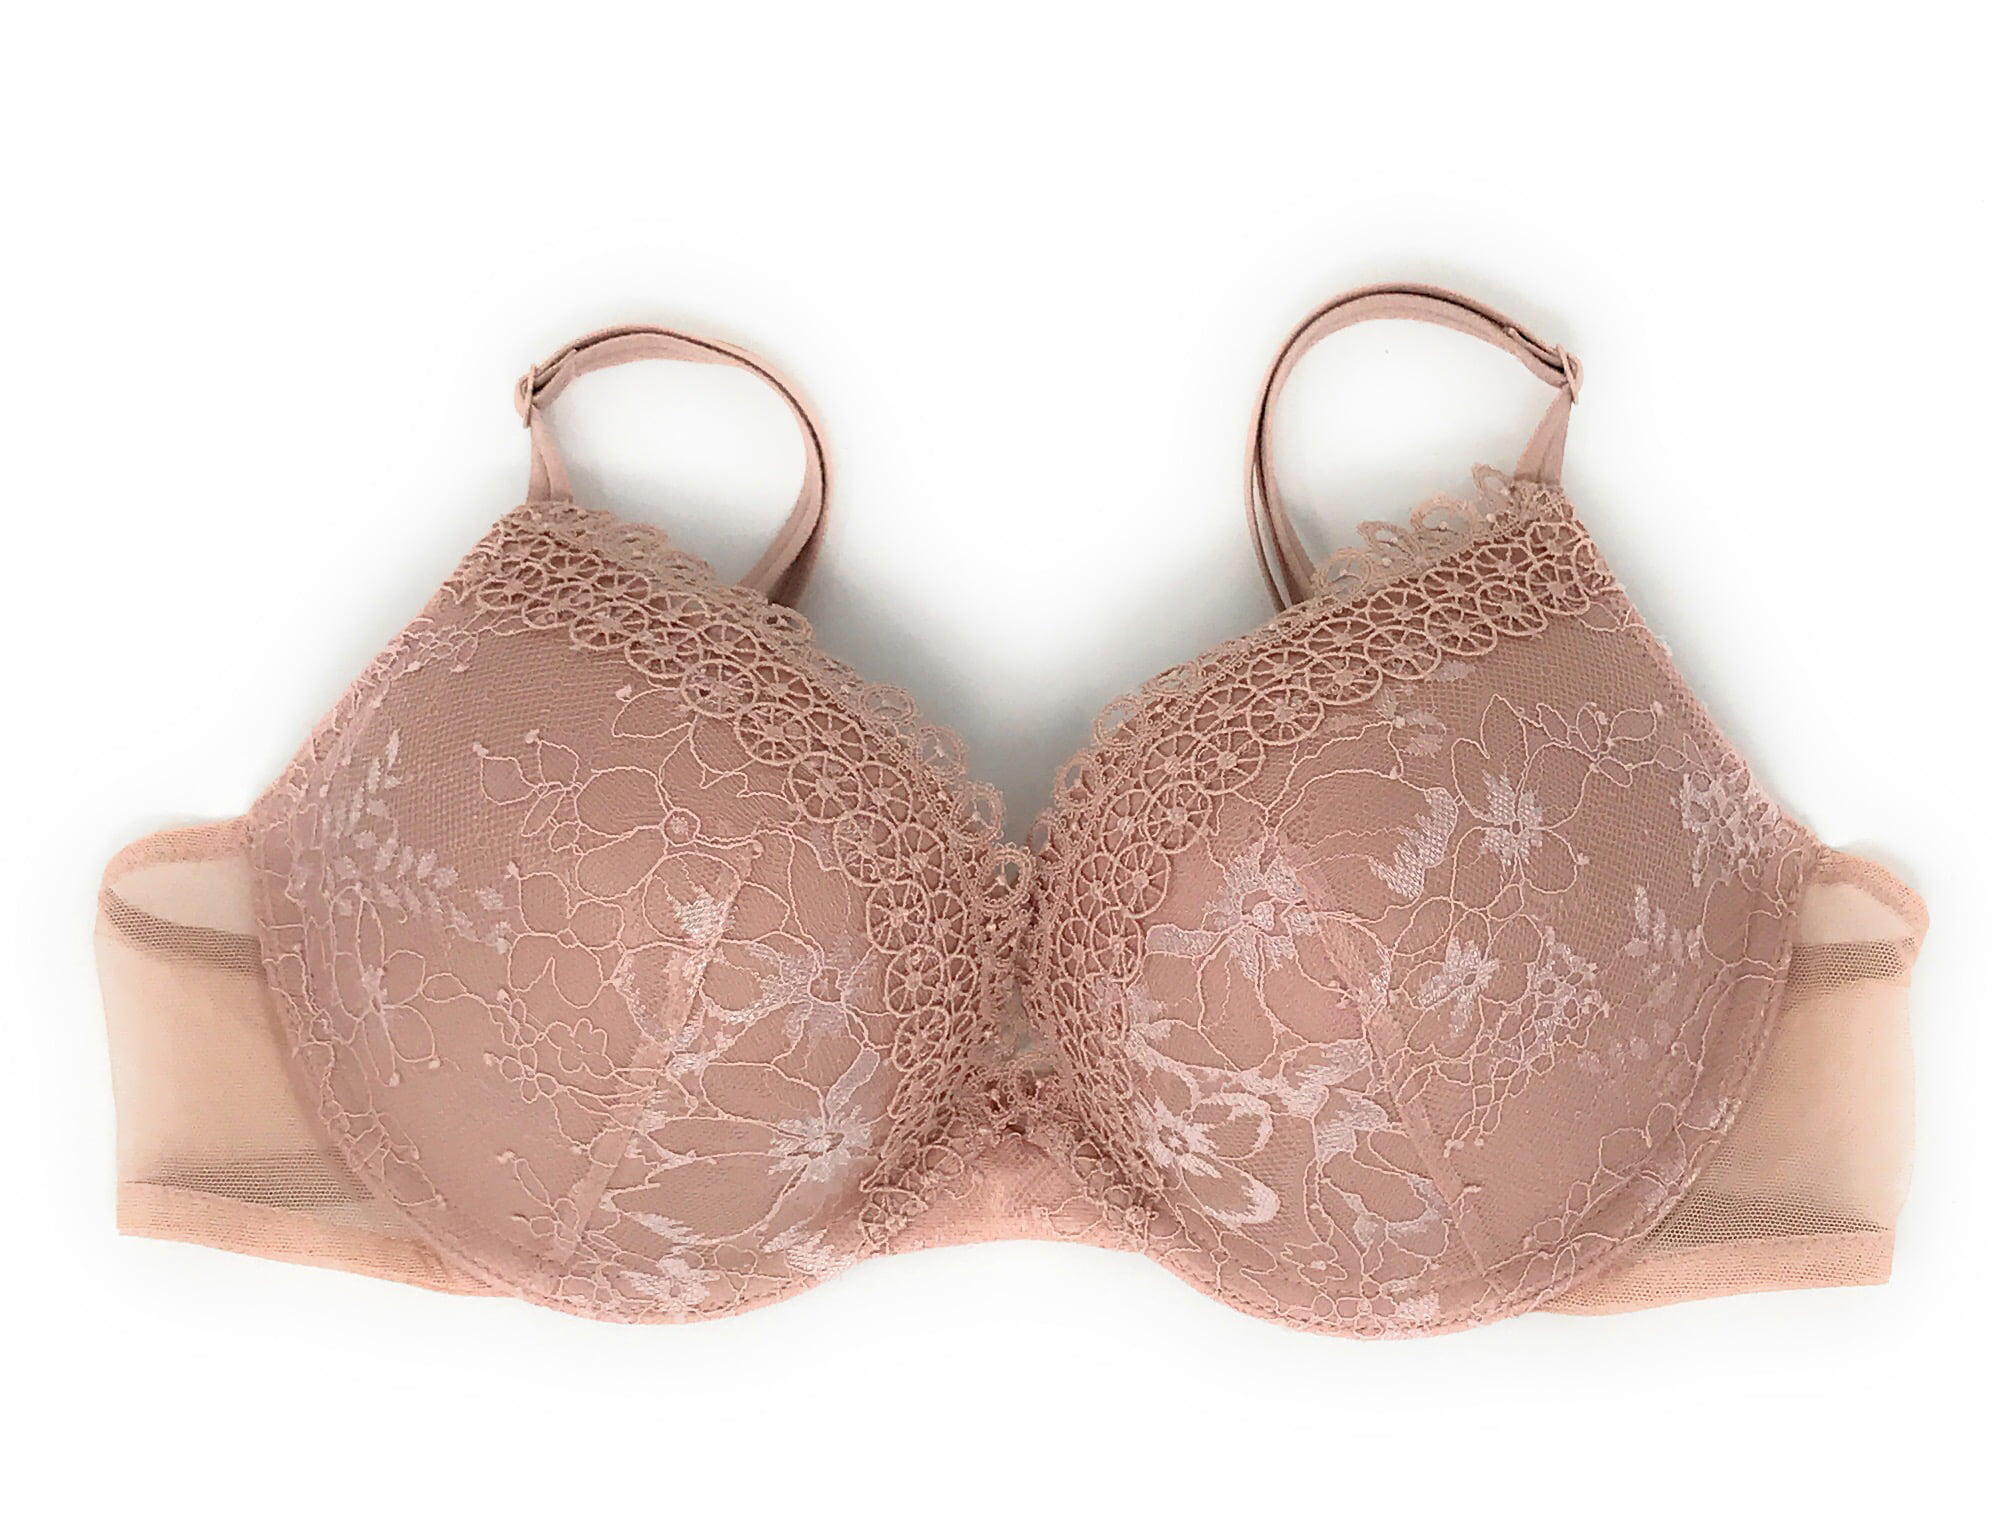 AUTHENTIC AND NEW VICTORIA'S SECRET BRA VERY SEXY PUSH UP 38 B BNWT 59.50